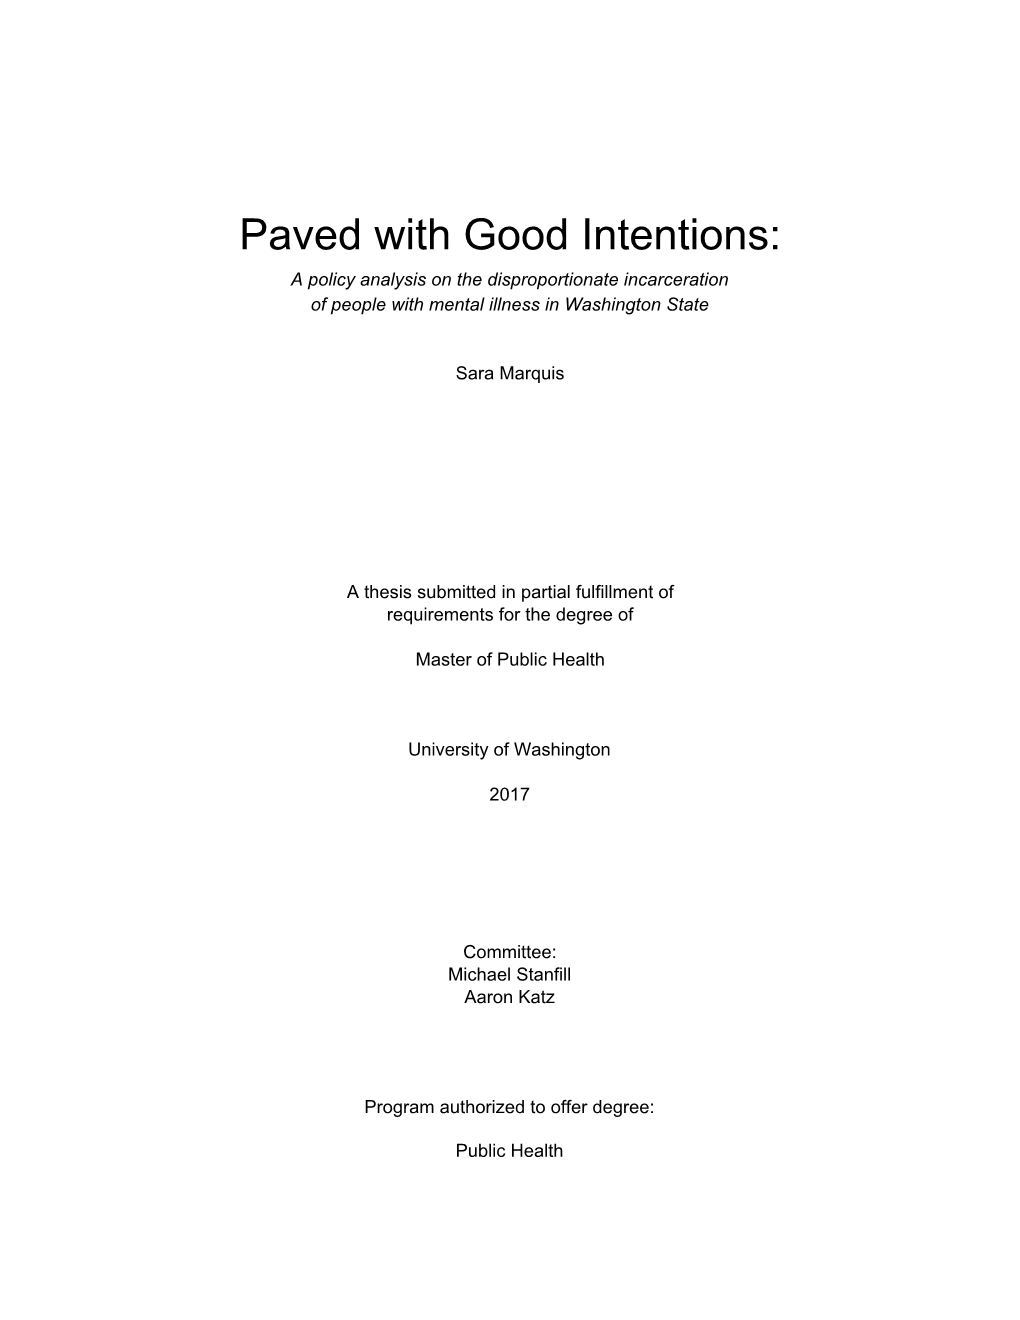 Paved with Good Intentions: a Policy Analysis on the Disproportionate Incarceration of People with Mental Illness in Washington State